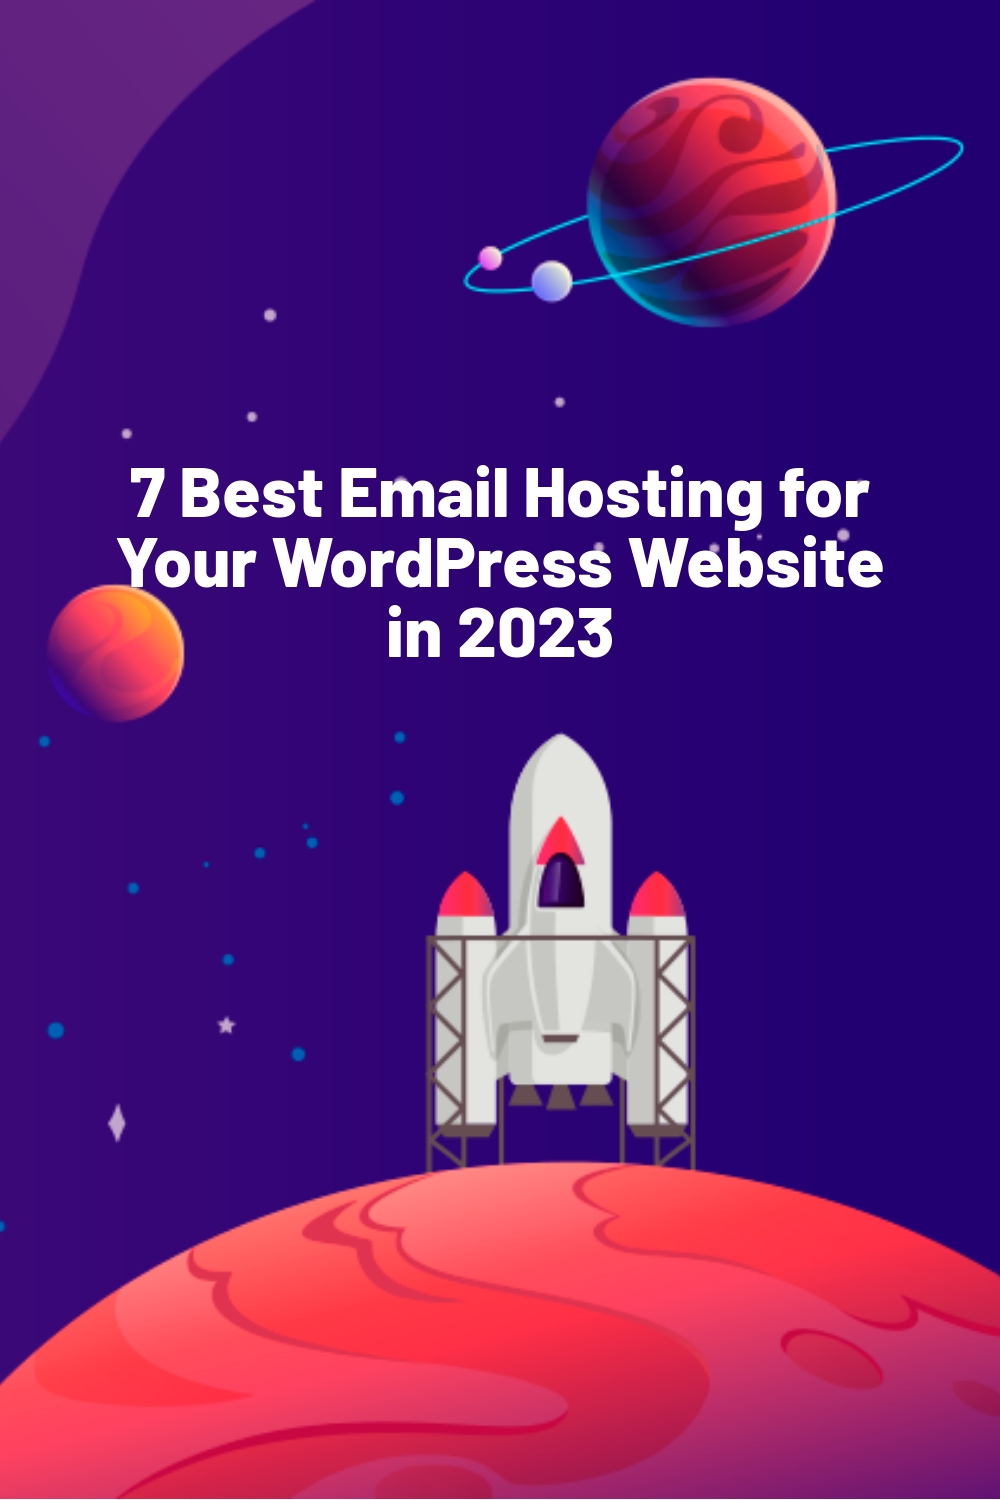 7 Best Email Hosting for Your WordPress Website in 2023